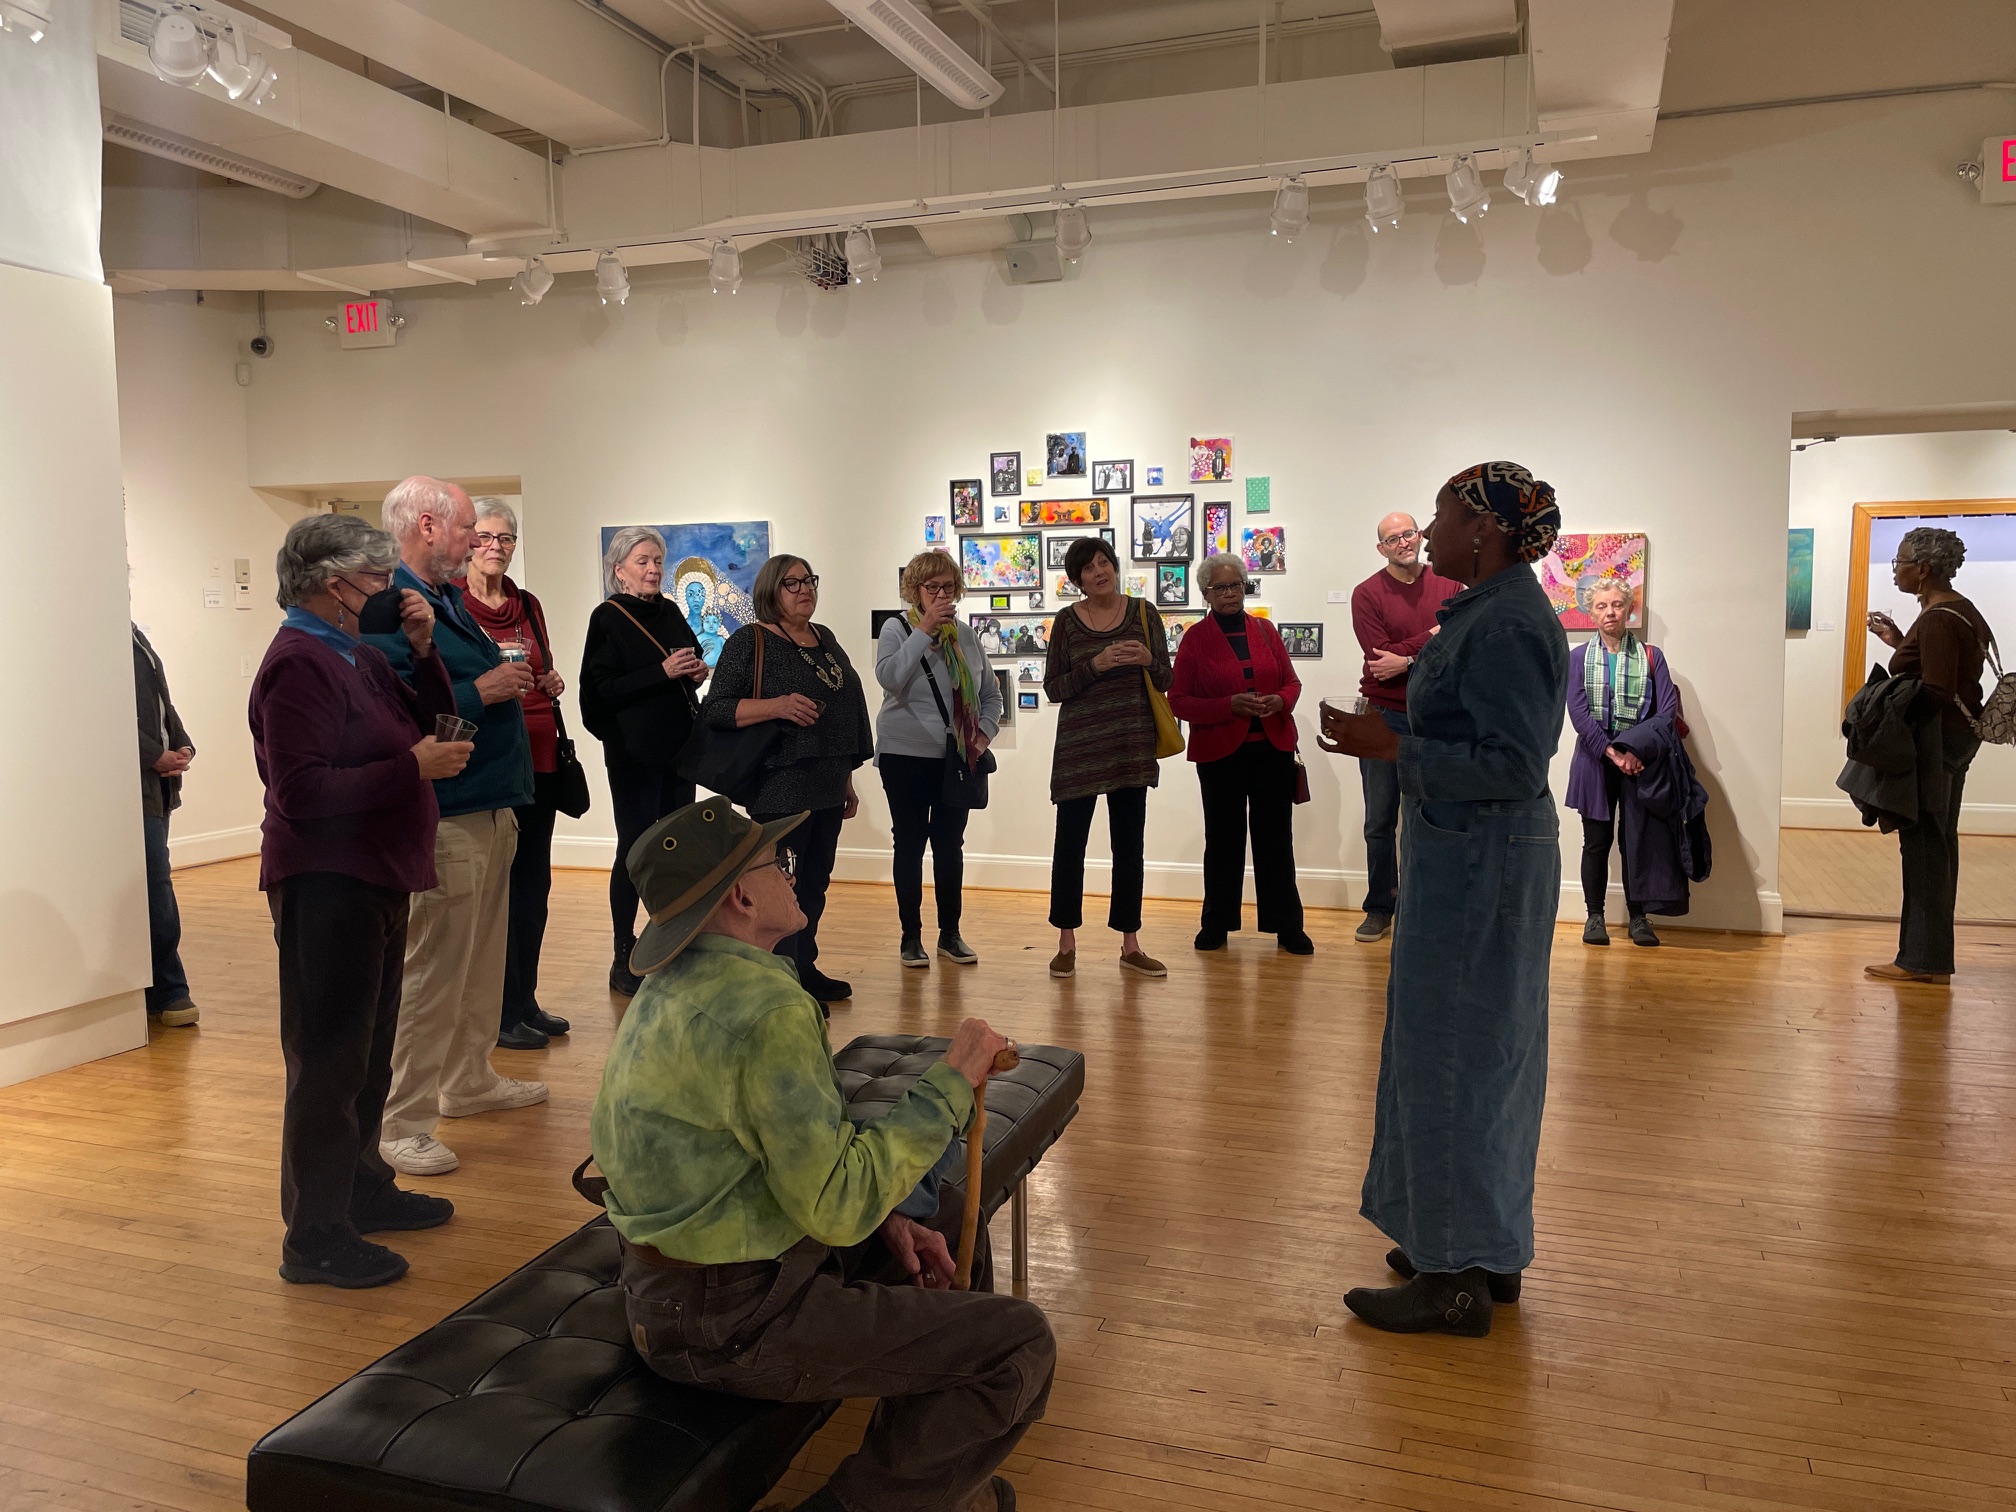 A crowd of people in an art gallery standing around a person of dark skin giving a talk.